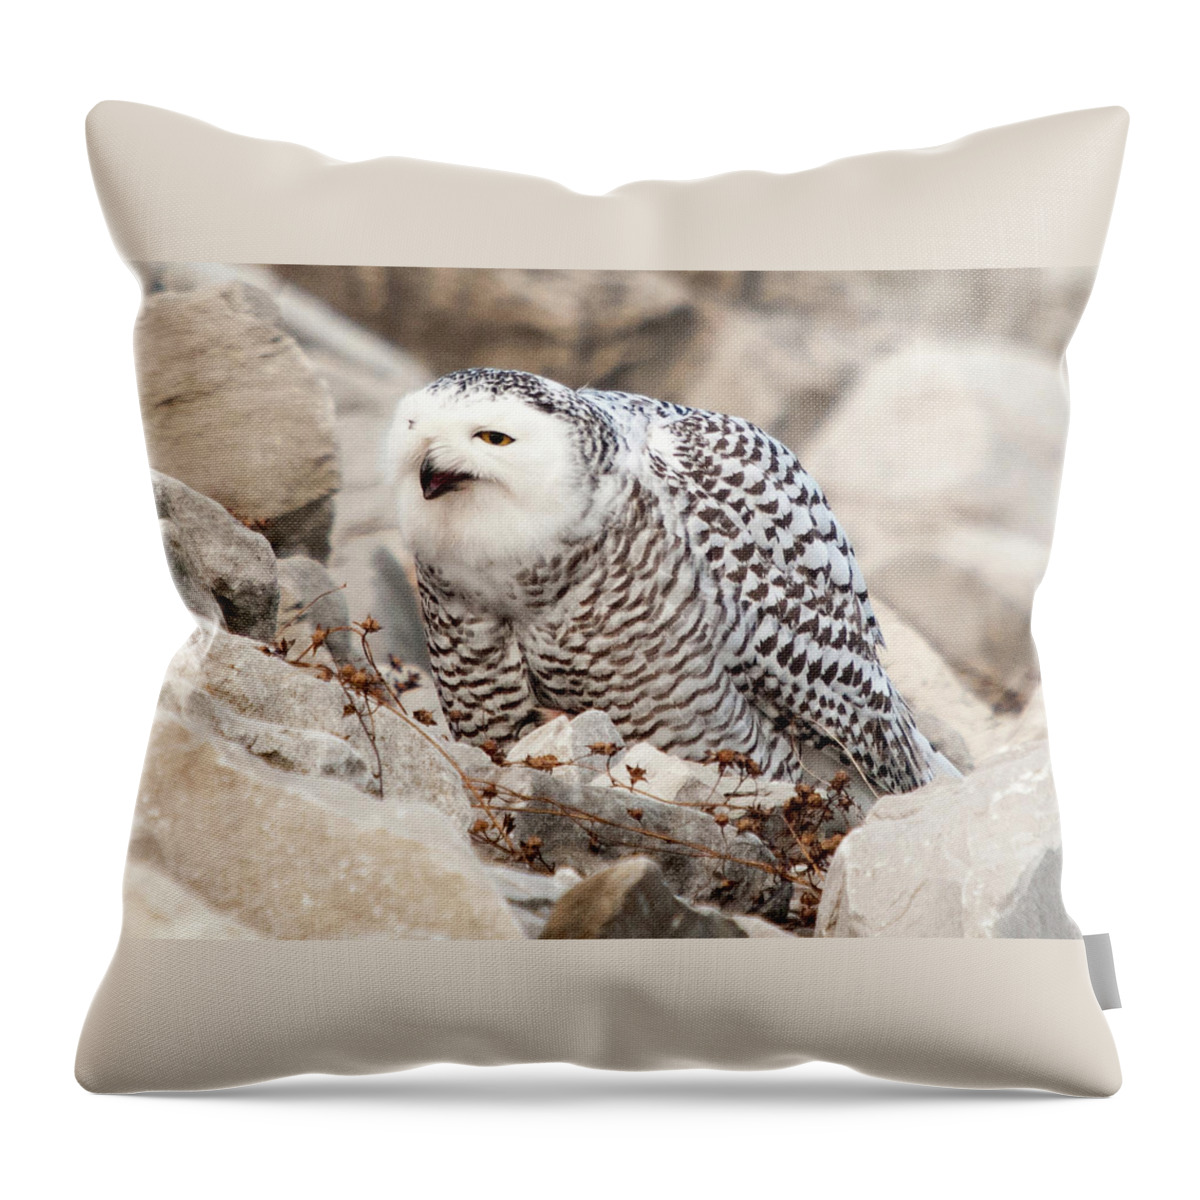 Missouri Throw Pillow featuring the photograph Laughing Owl by Steve Stuller